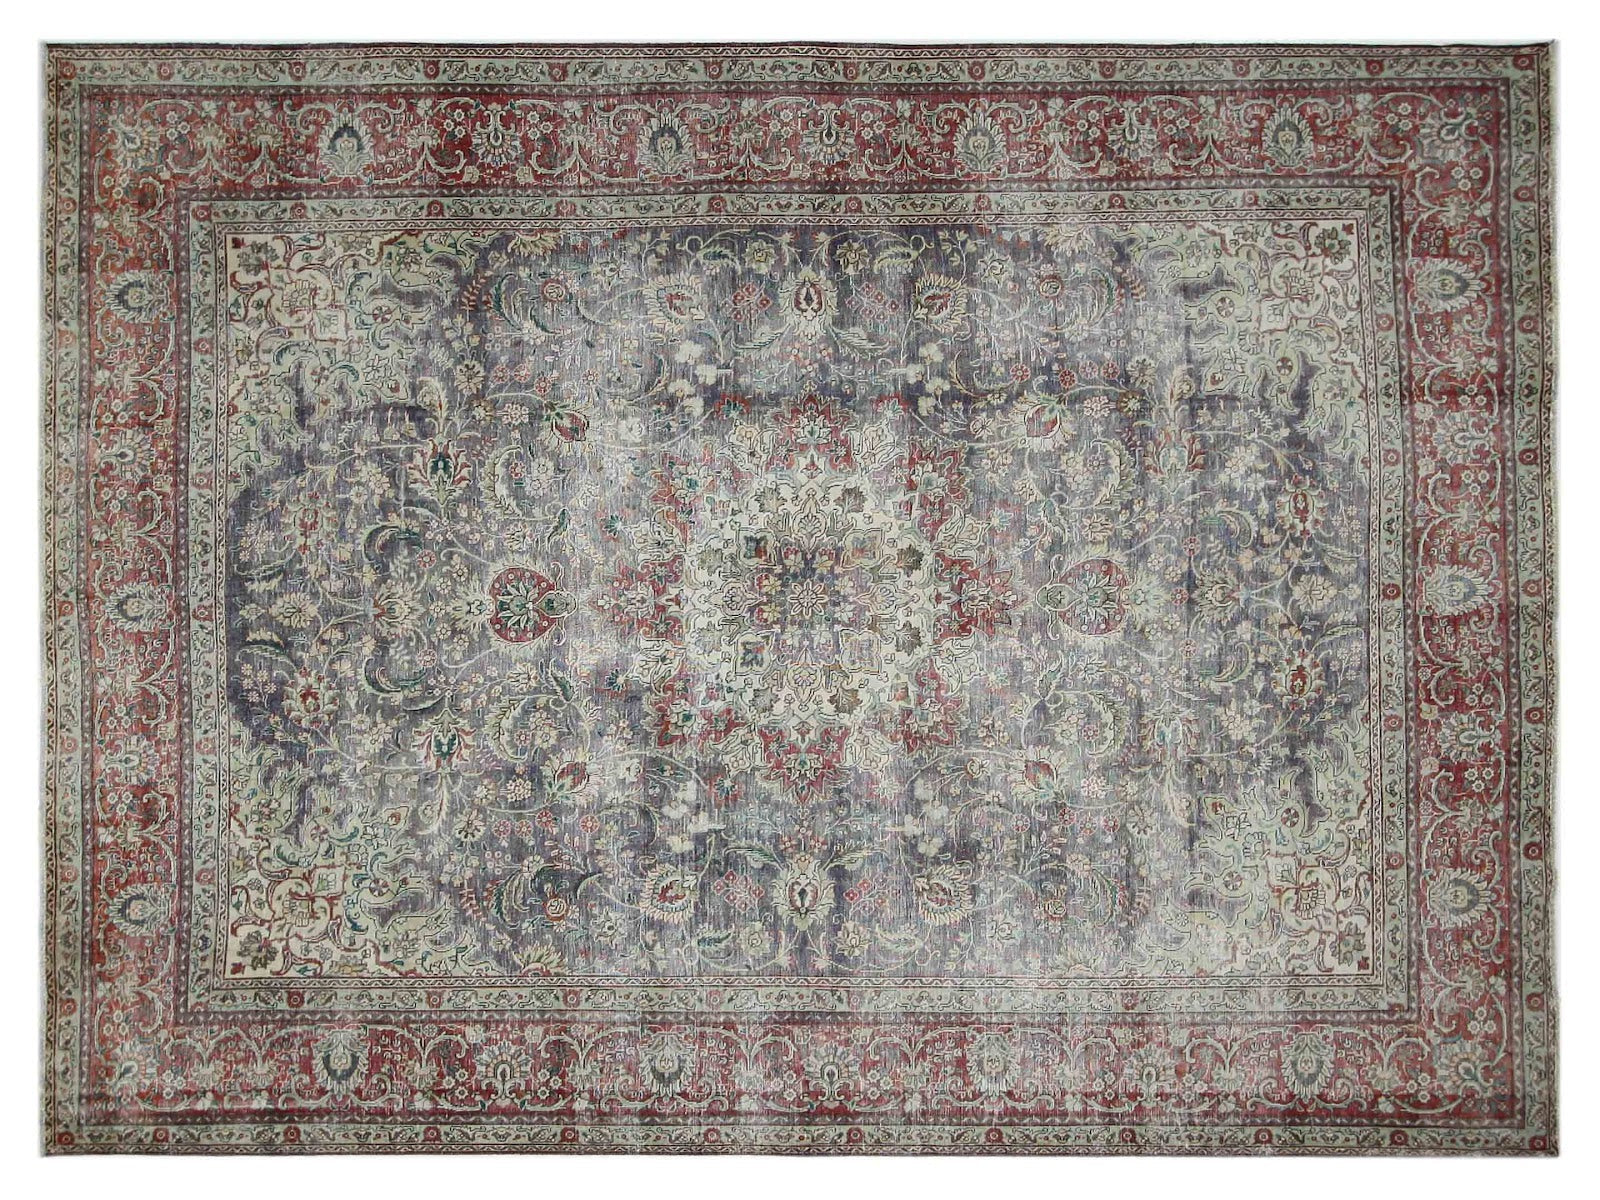 9x12 vintage Tabriz rug with faded blues and reds surrounding a classic medallion, hand-knotted in 100% wool